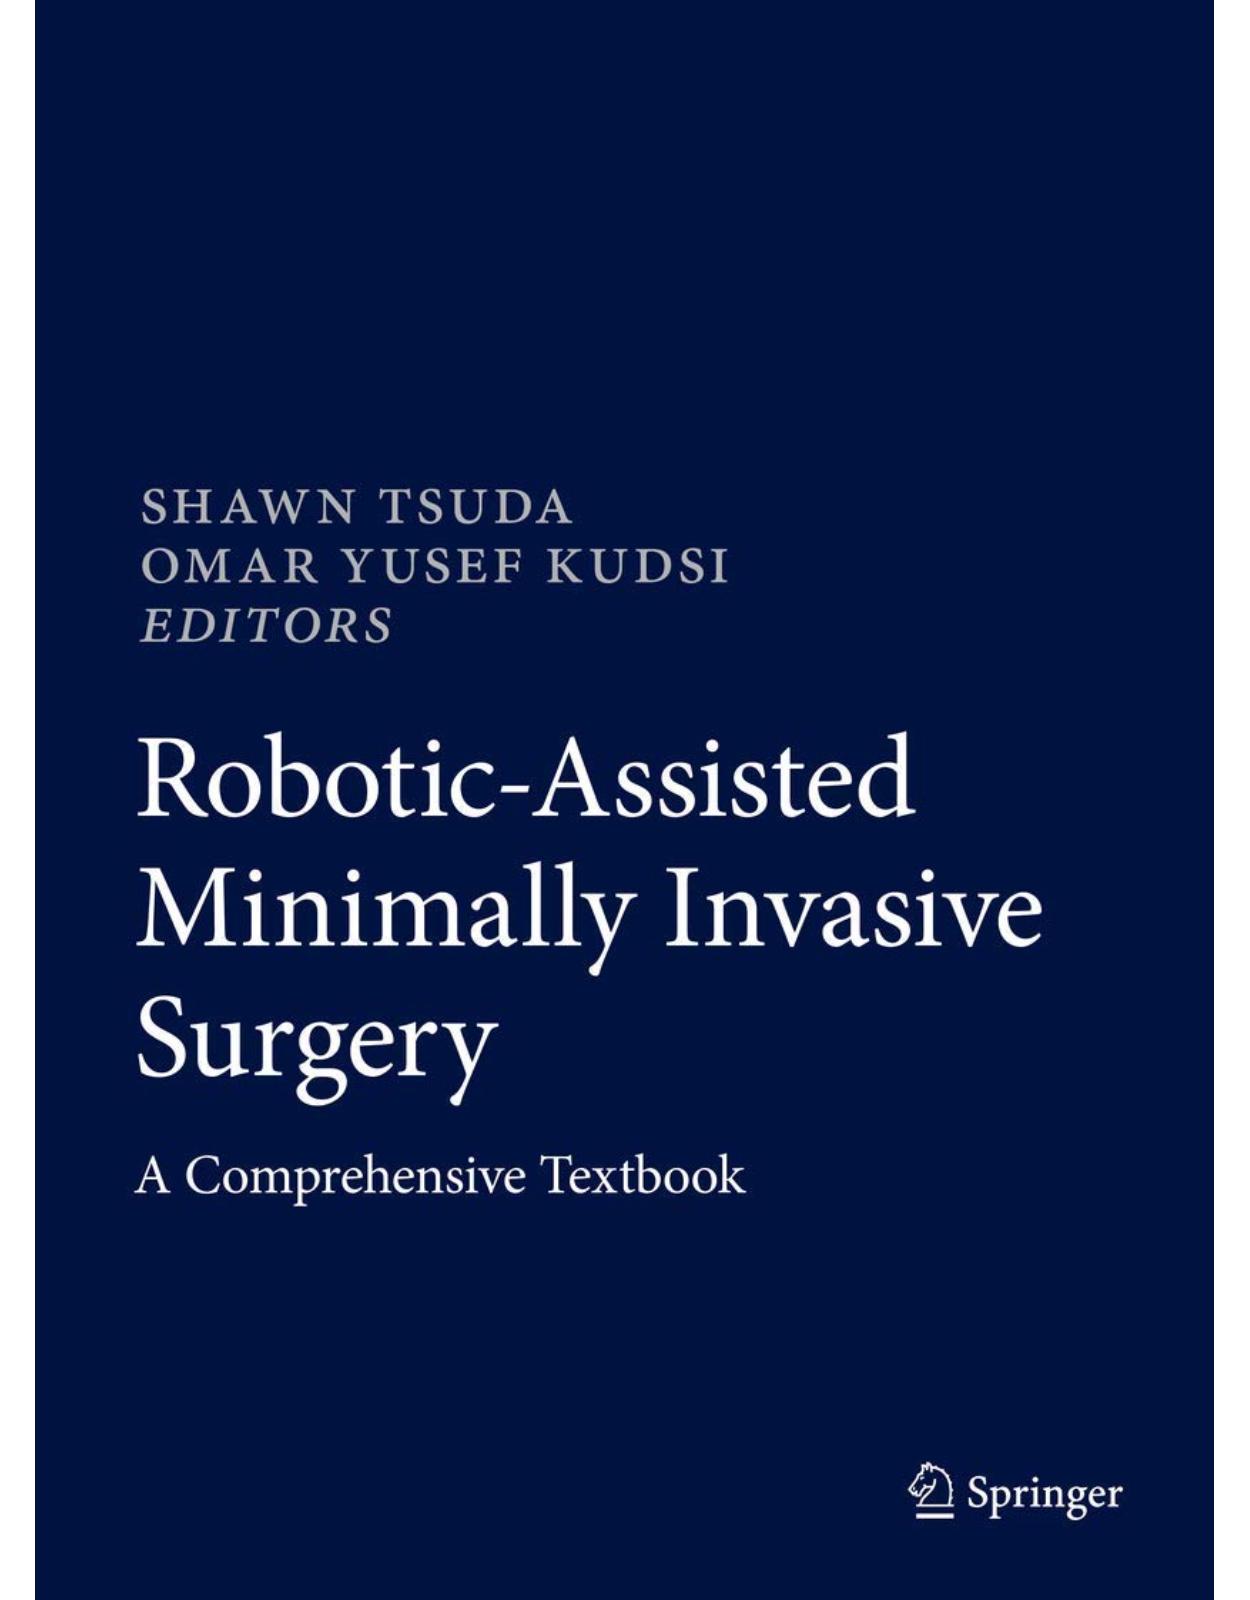 Robotic-Assisted Minimally Invasive Surgery: A Comprehensive Textbook